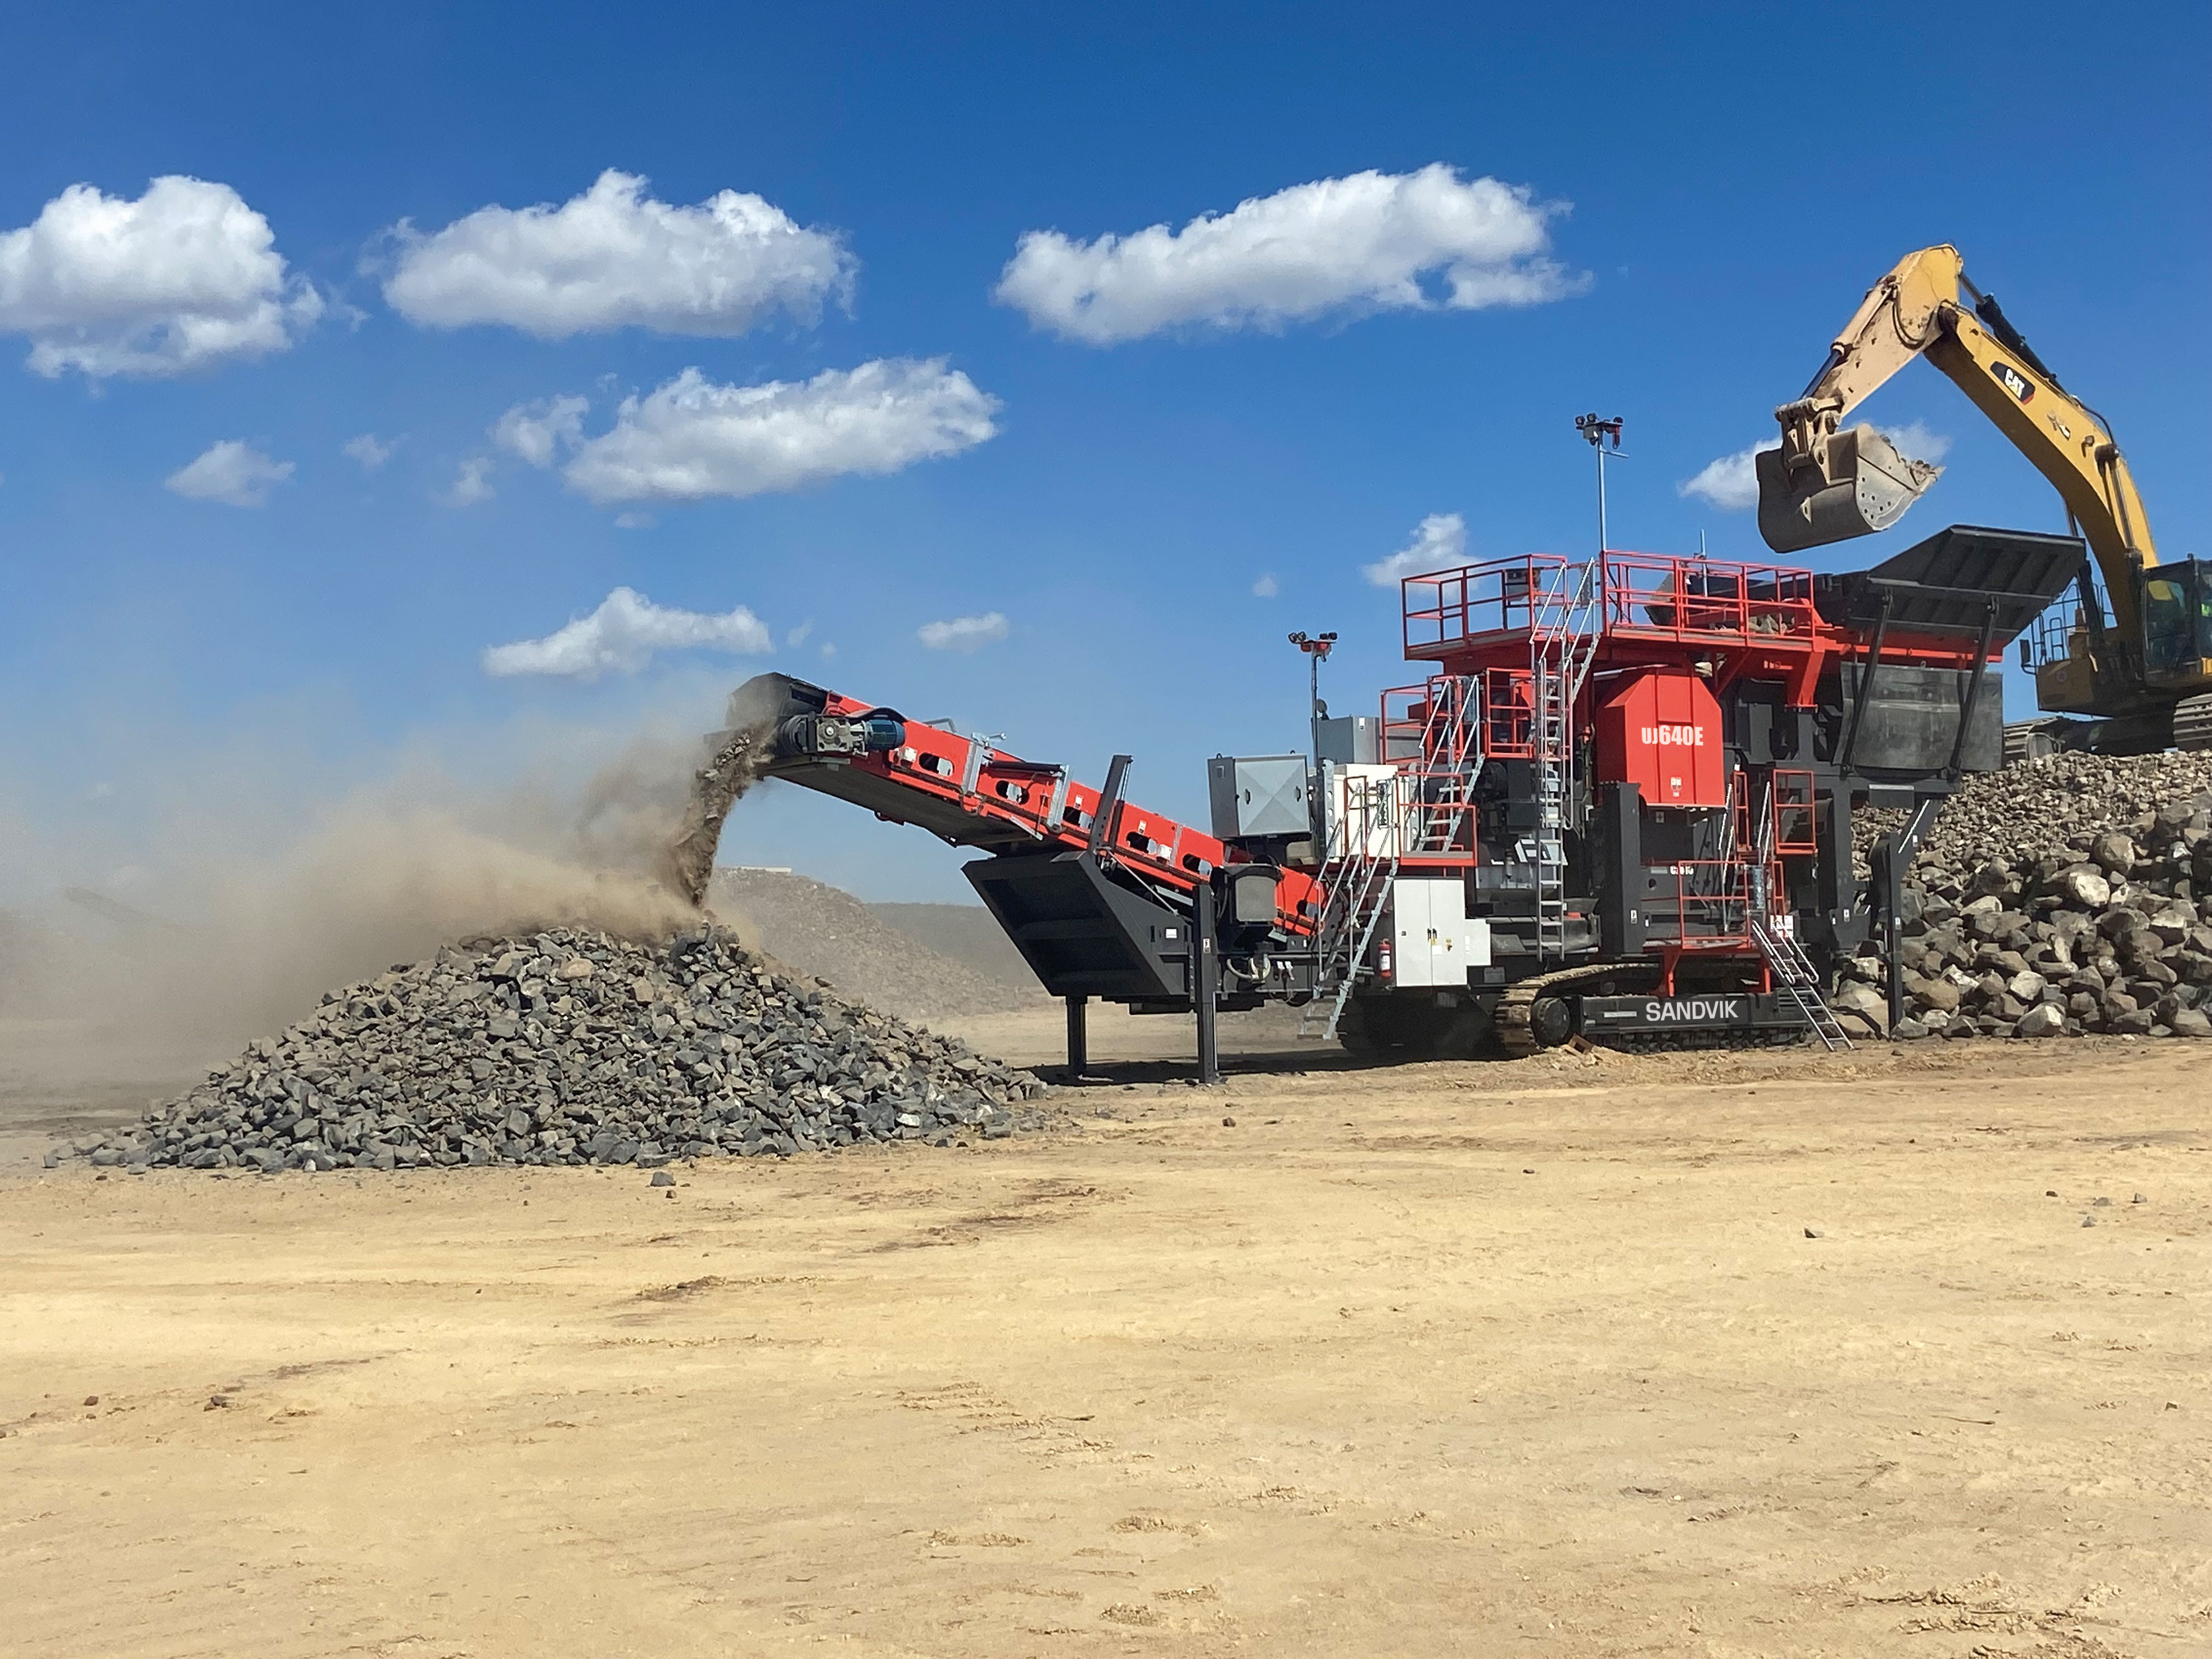 The UJ640E of Colorado Materials in action